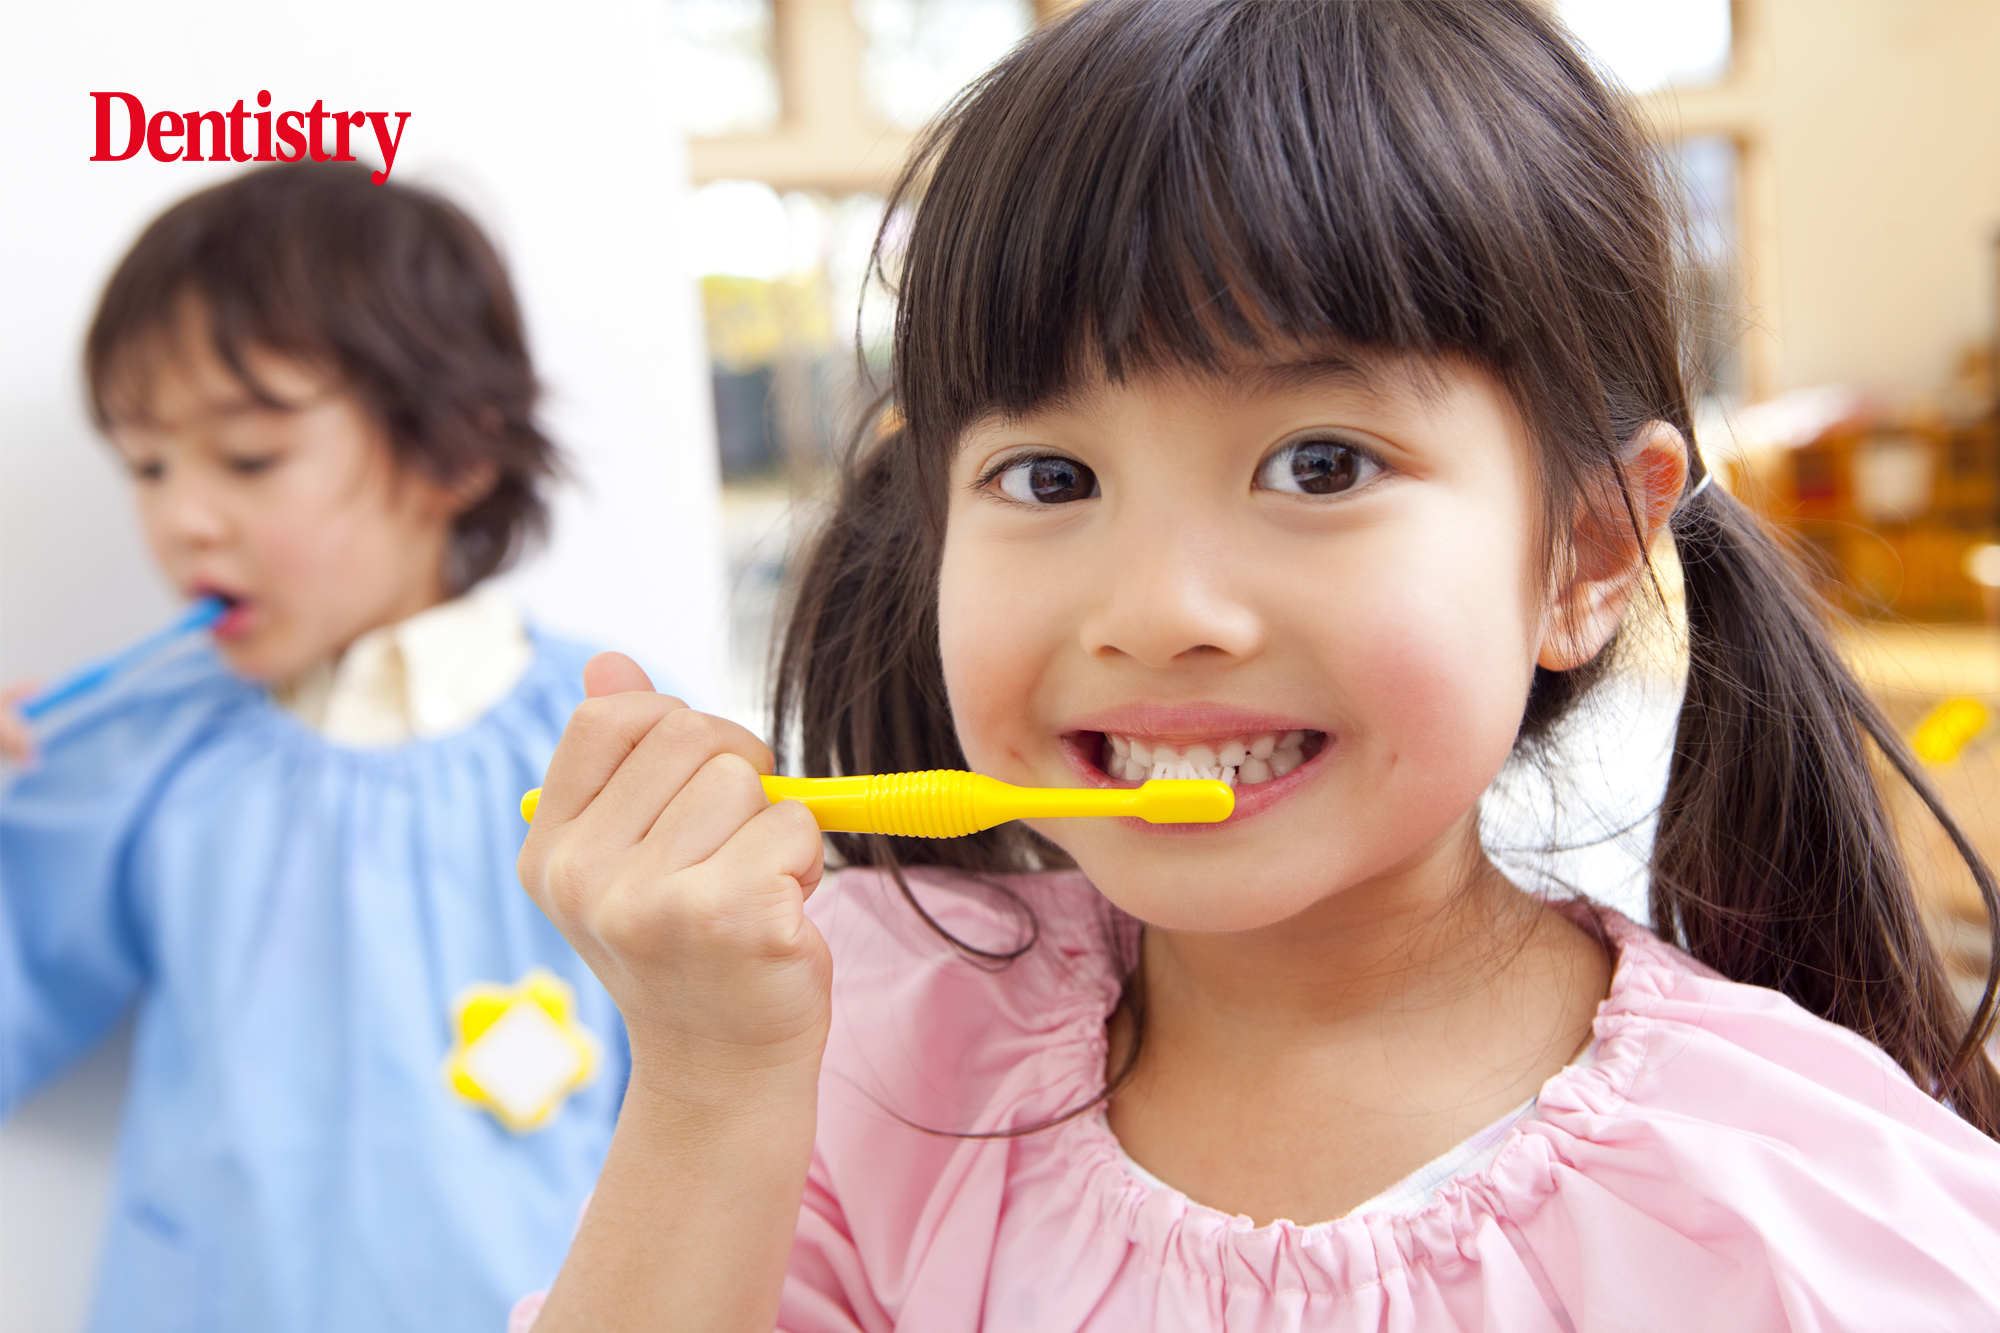 Labour pledges to introduce supervised toothbrushing during free breakfast clubs